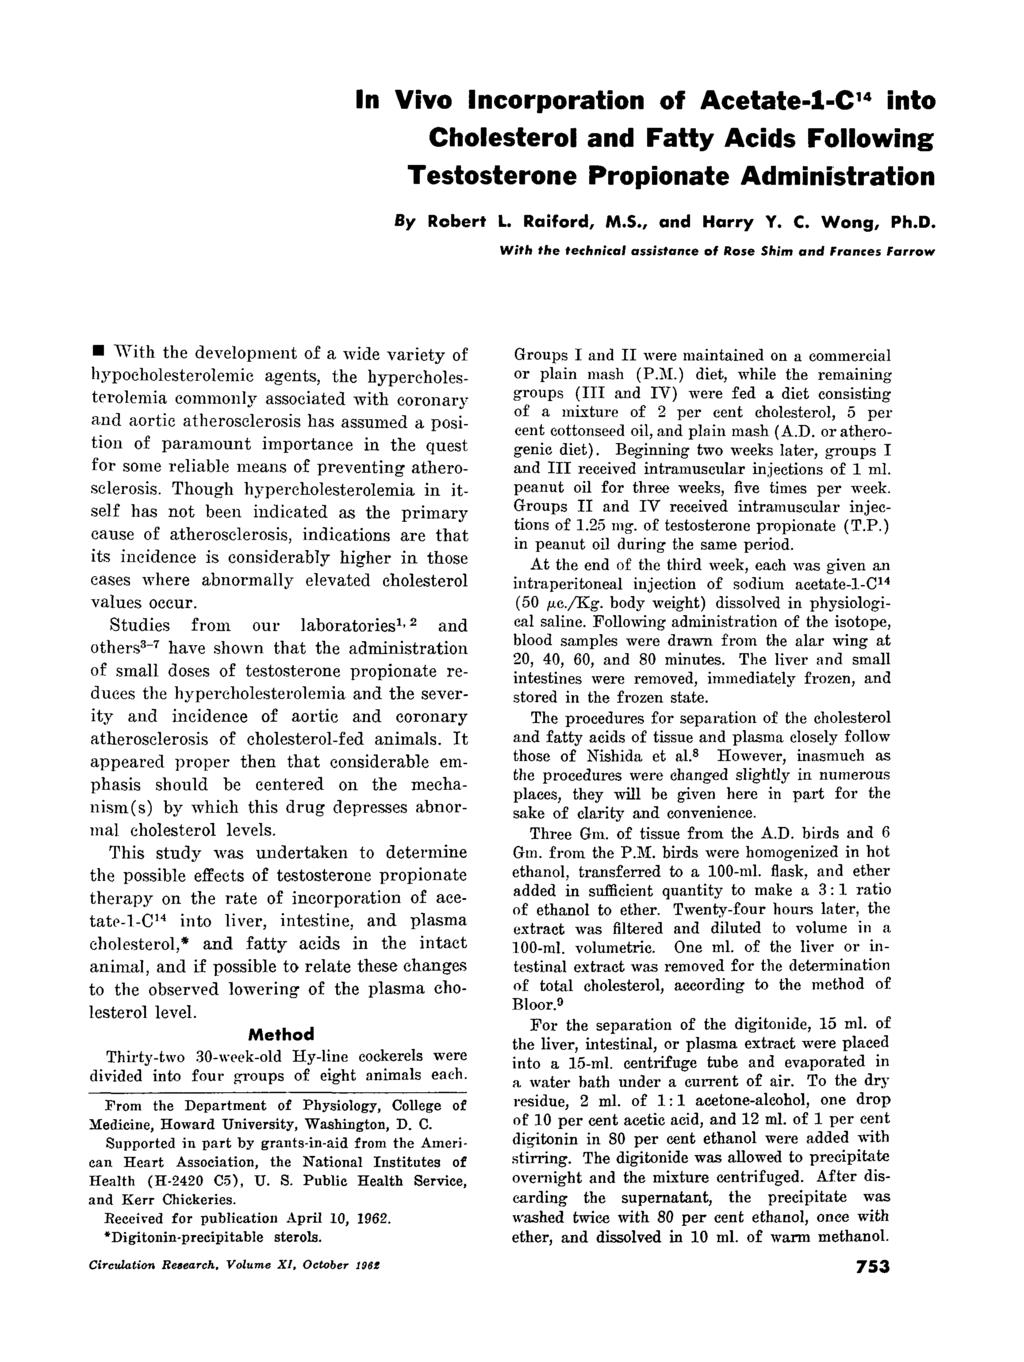 In Vivo Incorporation of Acetate-1-C" into Cholesterol and Fatty Acids Following Testosterone Propionate Administration By Robert L. Raiford, M.S., and Harry Y. C. Wong, Ph.D.